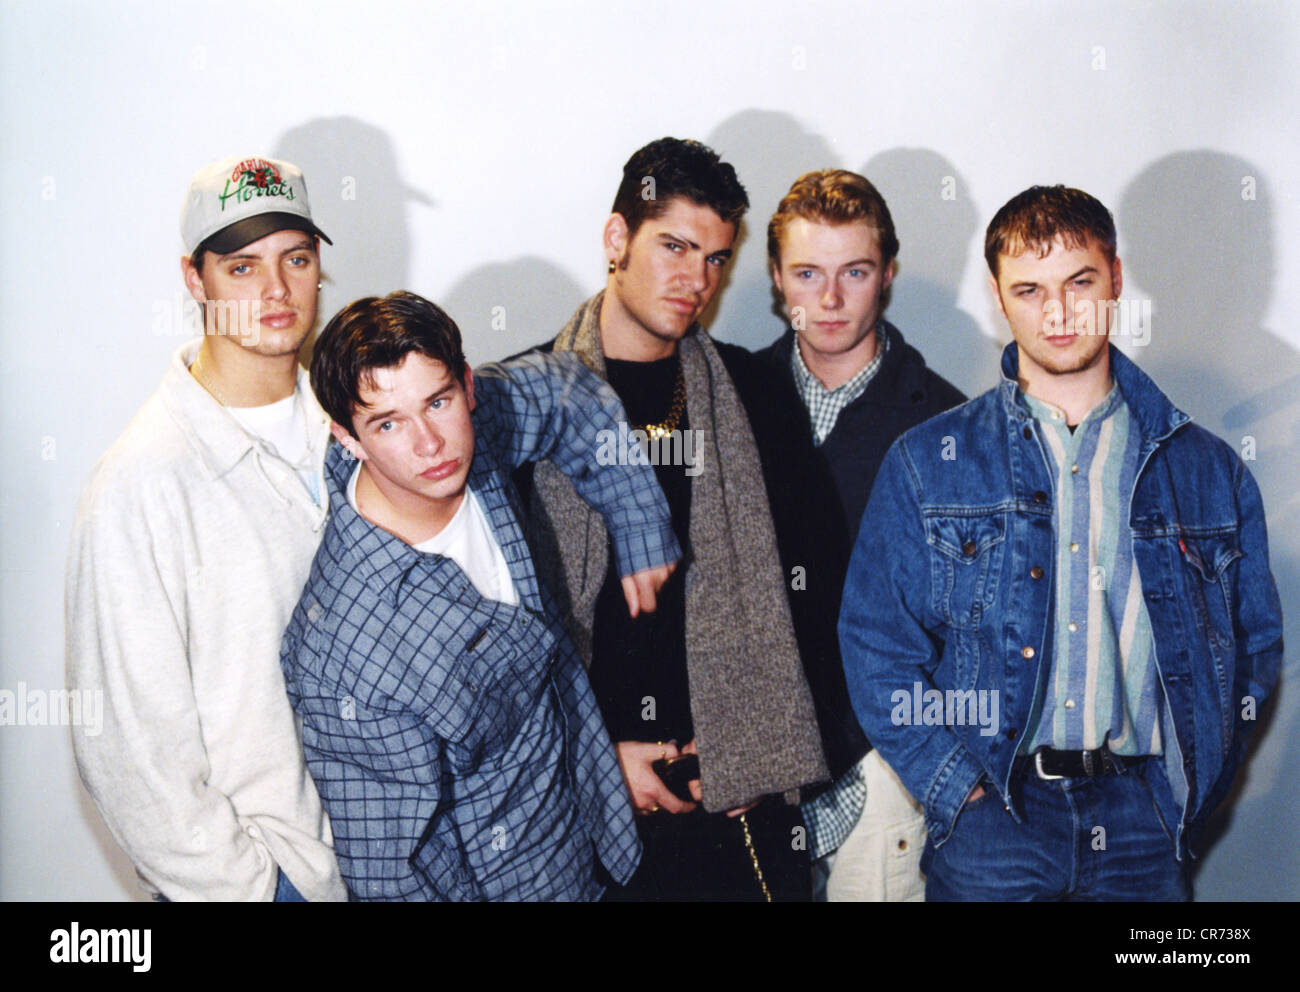 Boyzone, Irish pop group, formed in 1993, (Keith Duffy, Stephen Gately, Shane Lynch, Ronan Keating, Mikey Graham), group picture, Munich, Germany, March 1996, Stock Photo